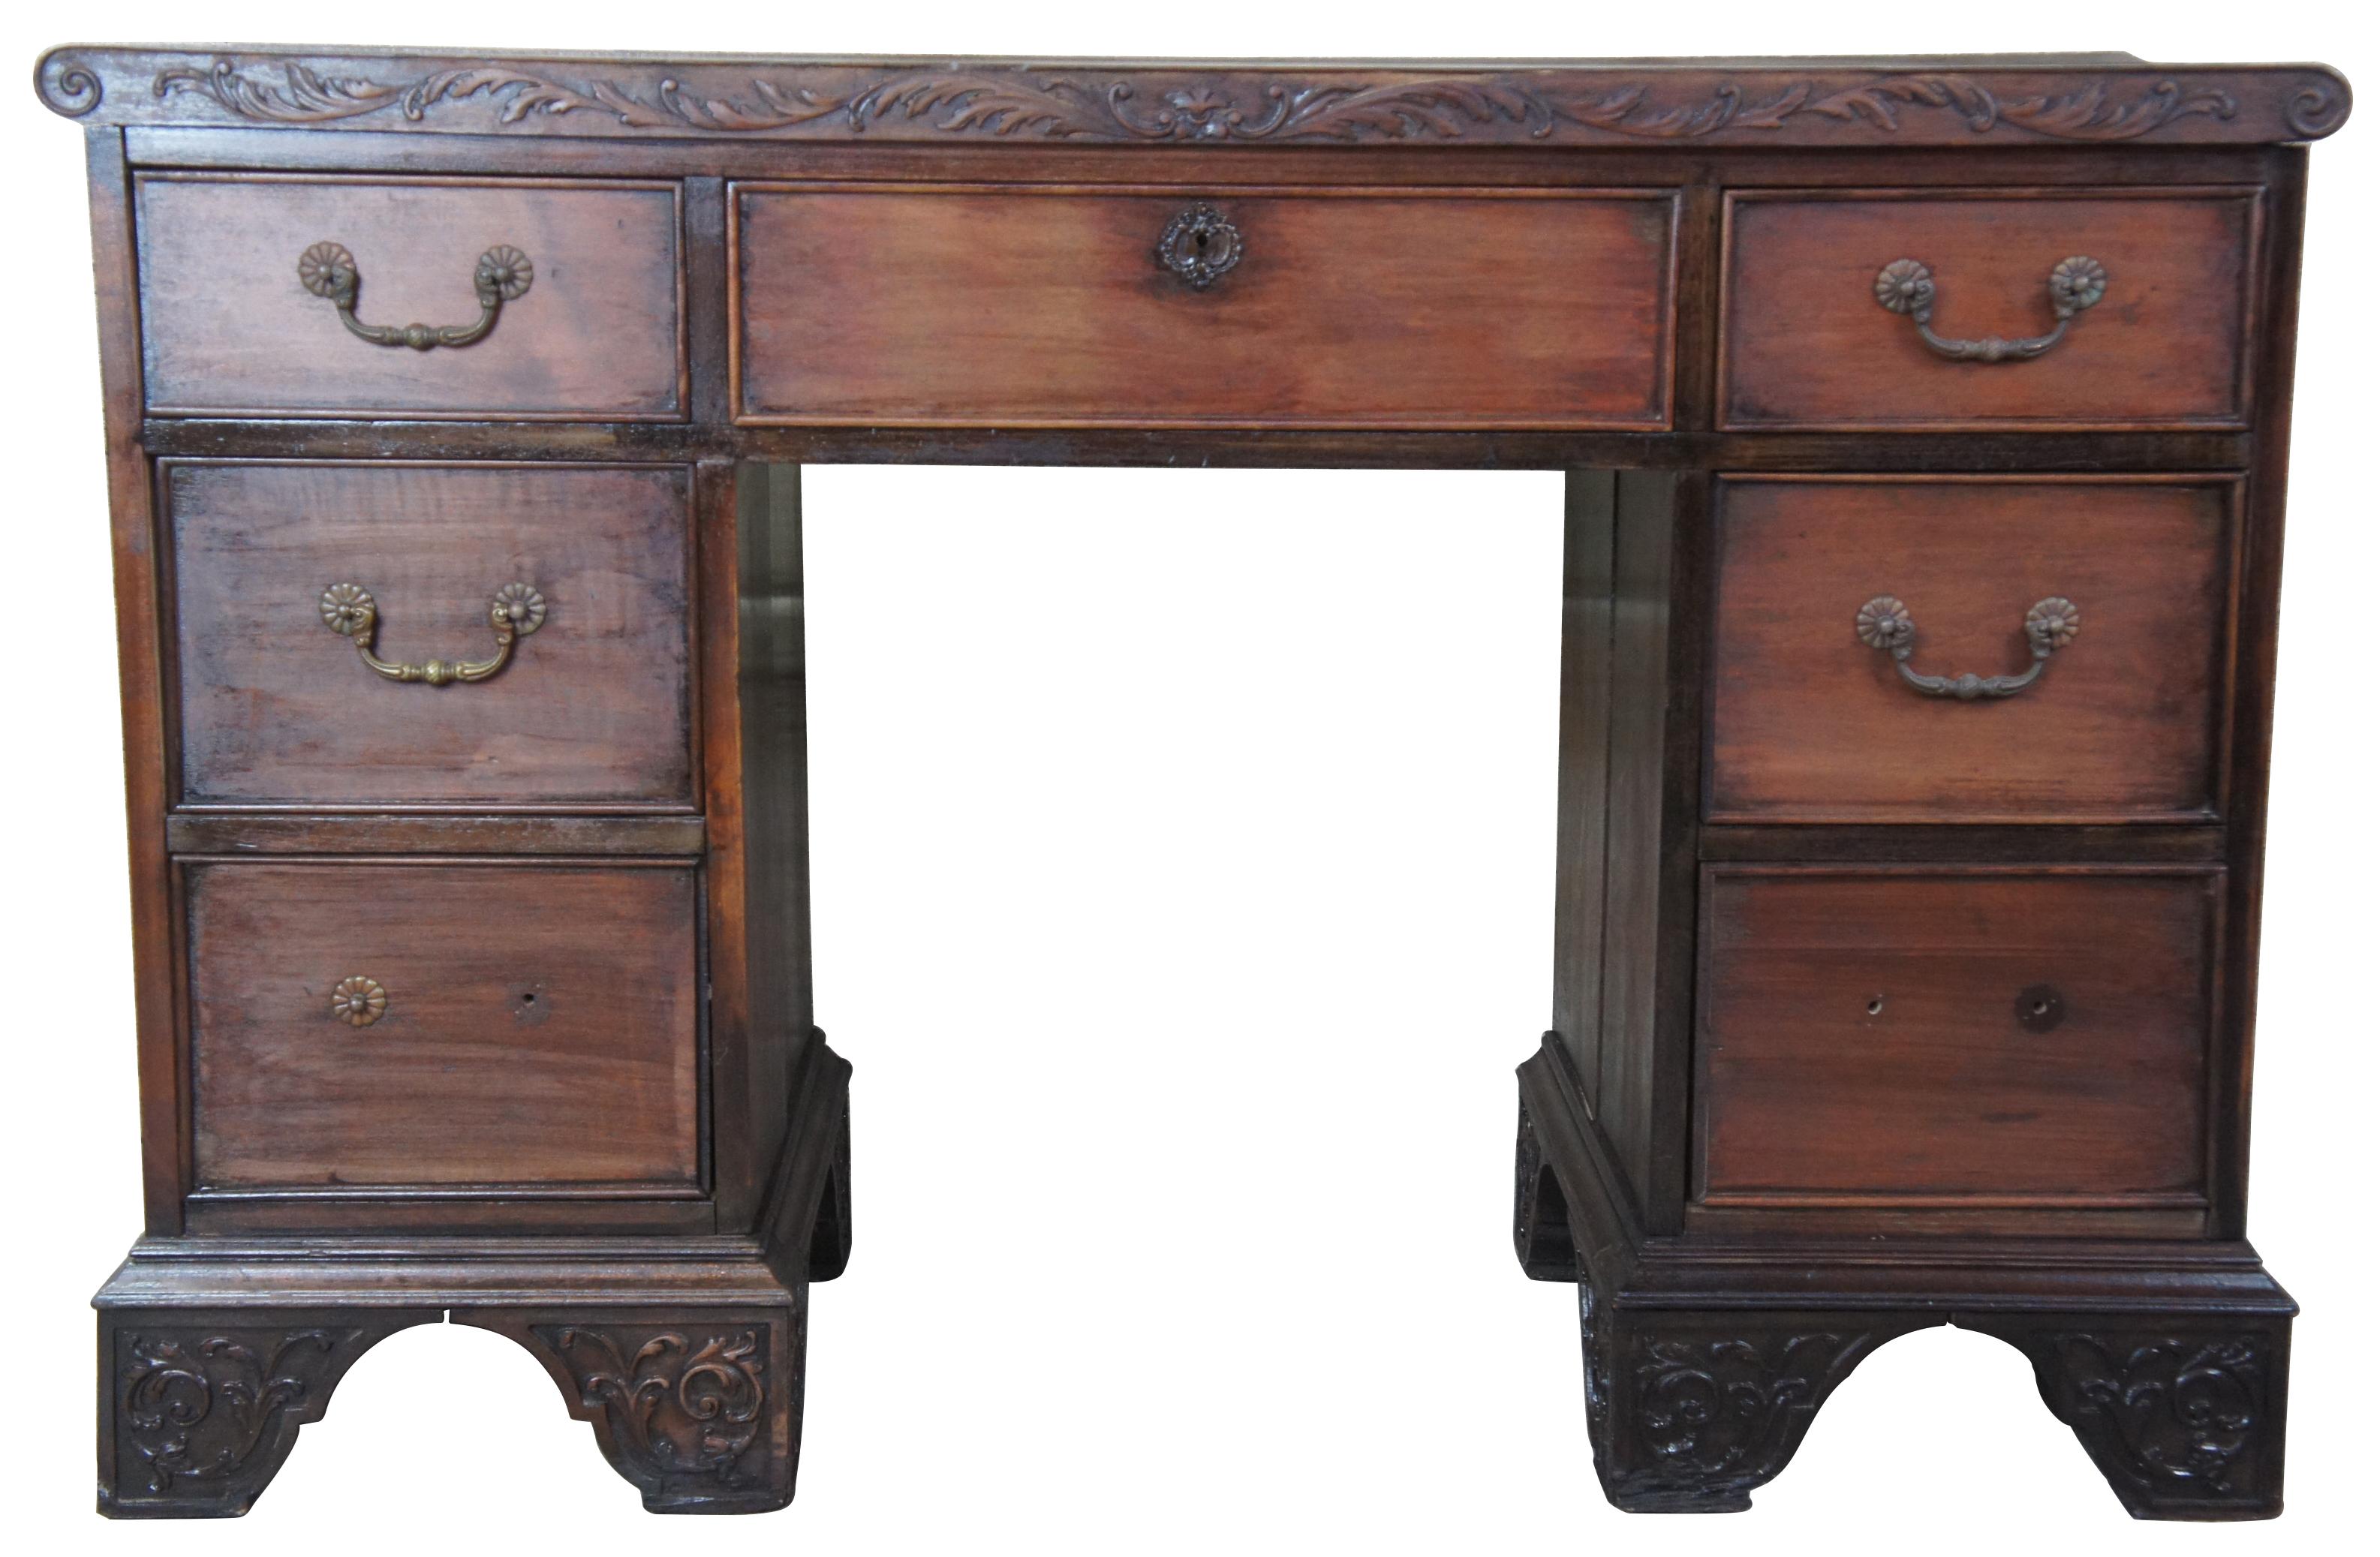 Rococo Revival desk, circa 1940s. Made from walnut with seven drawers and ornately carved detail. Measure: 46